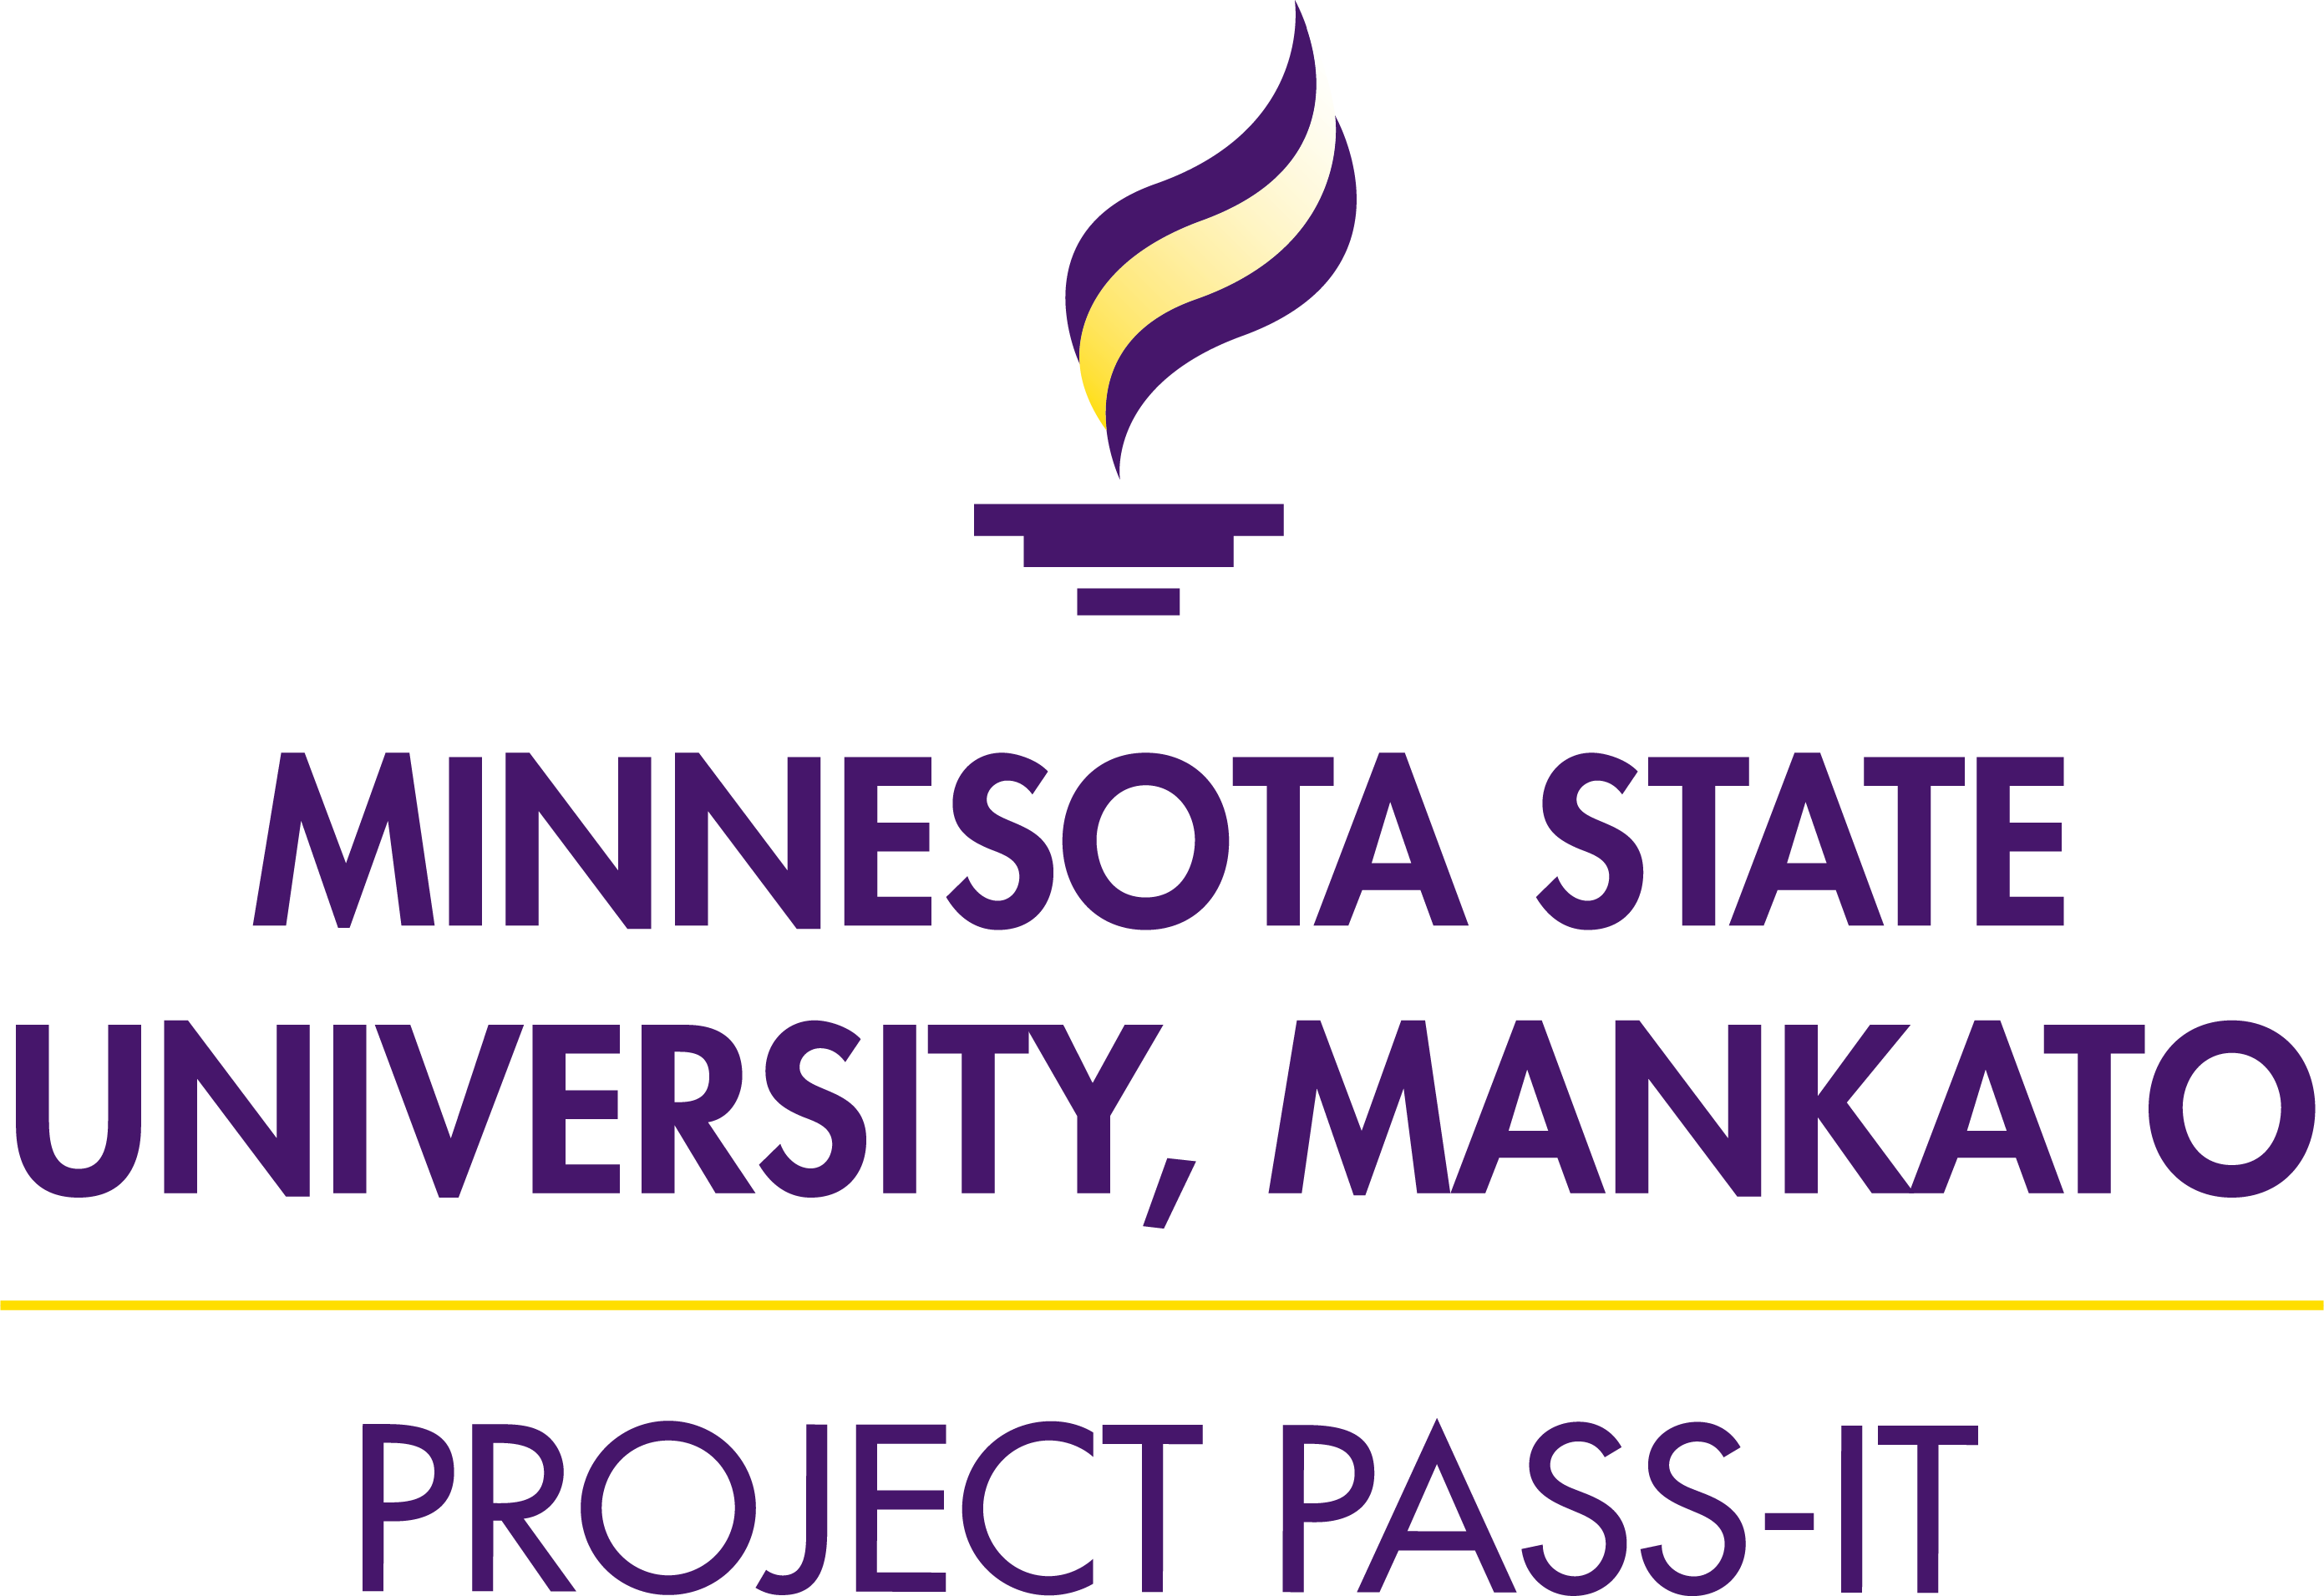 a purple and yellow logo